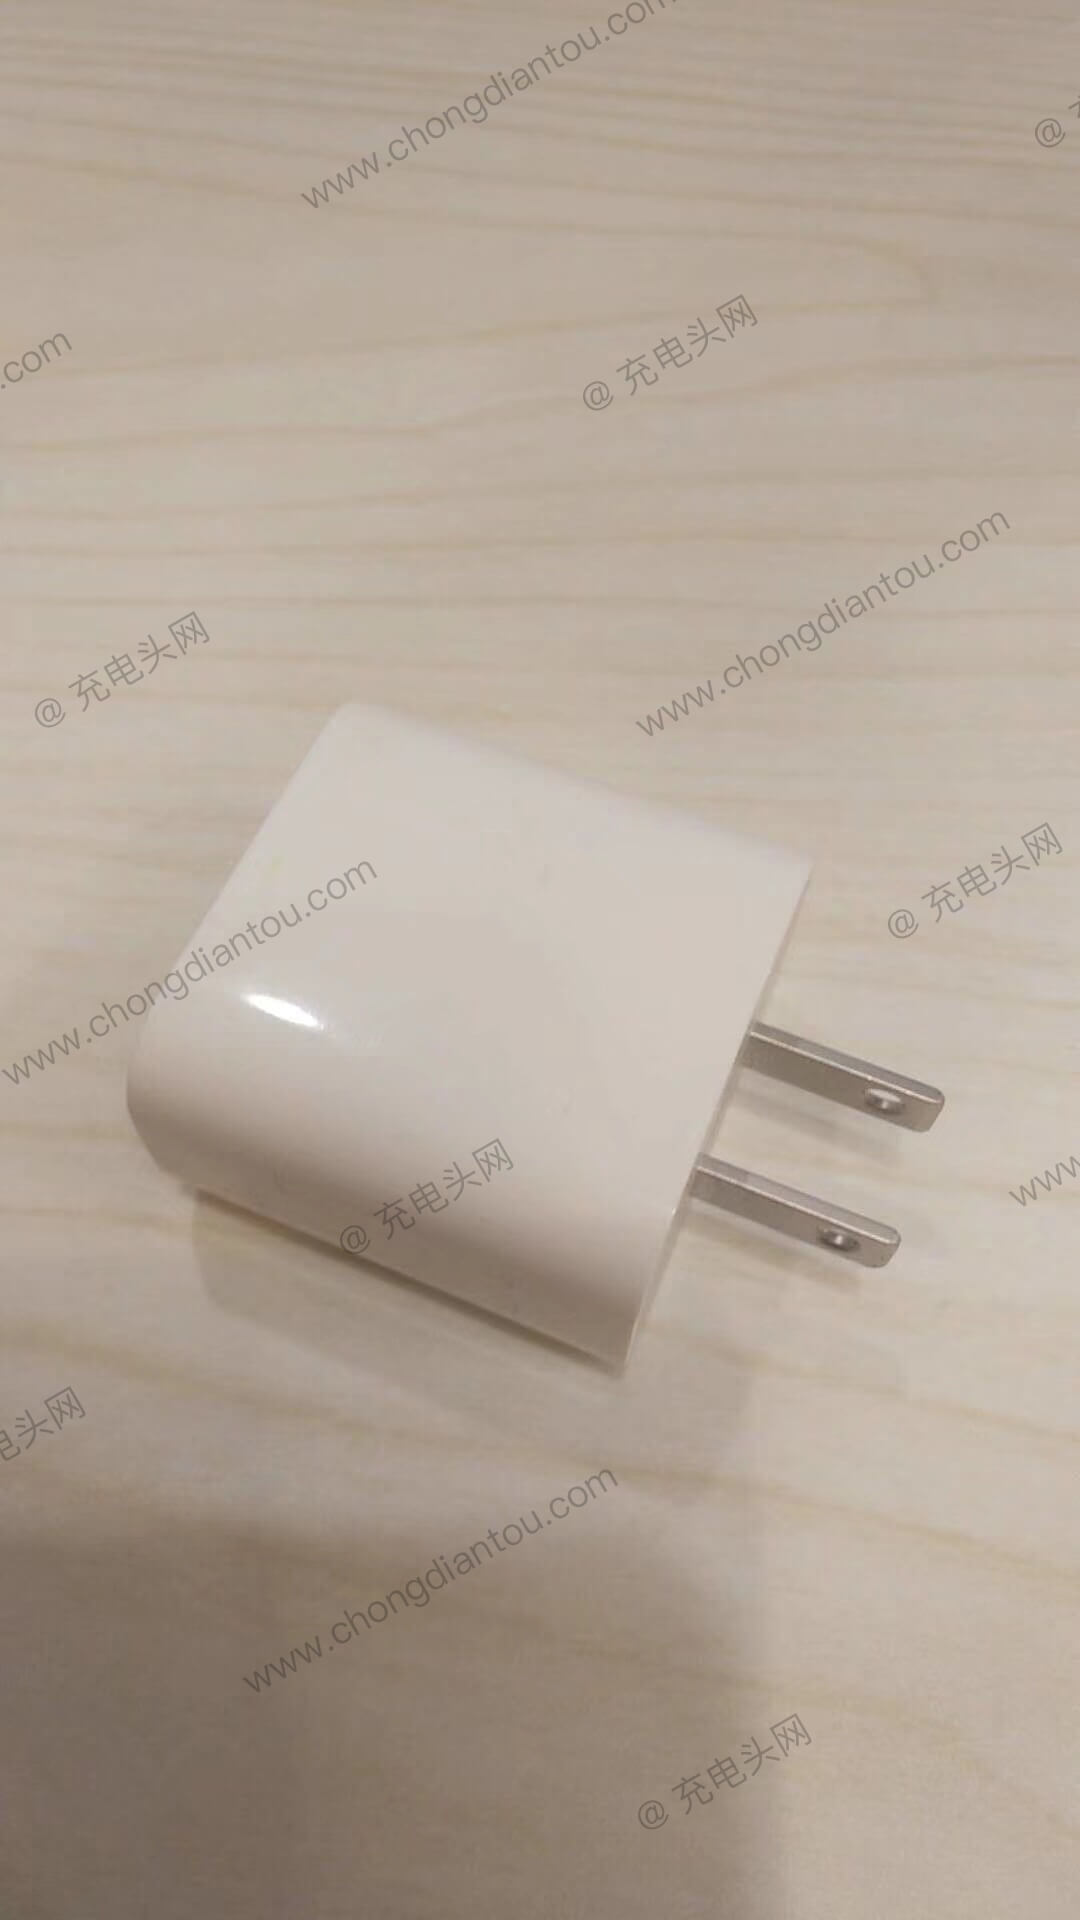 iPhone 2018 Fast Charging